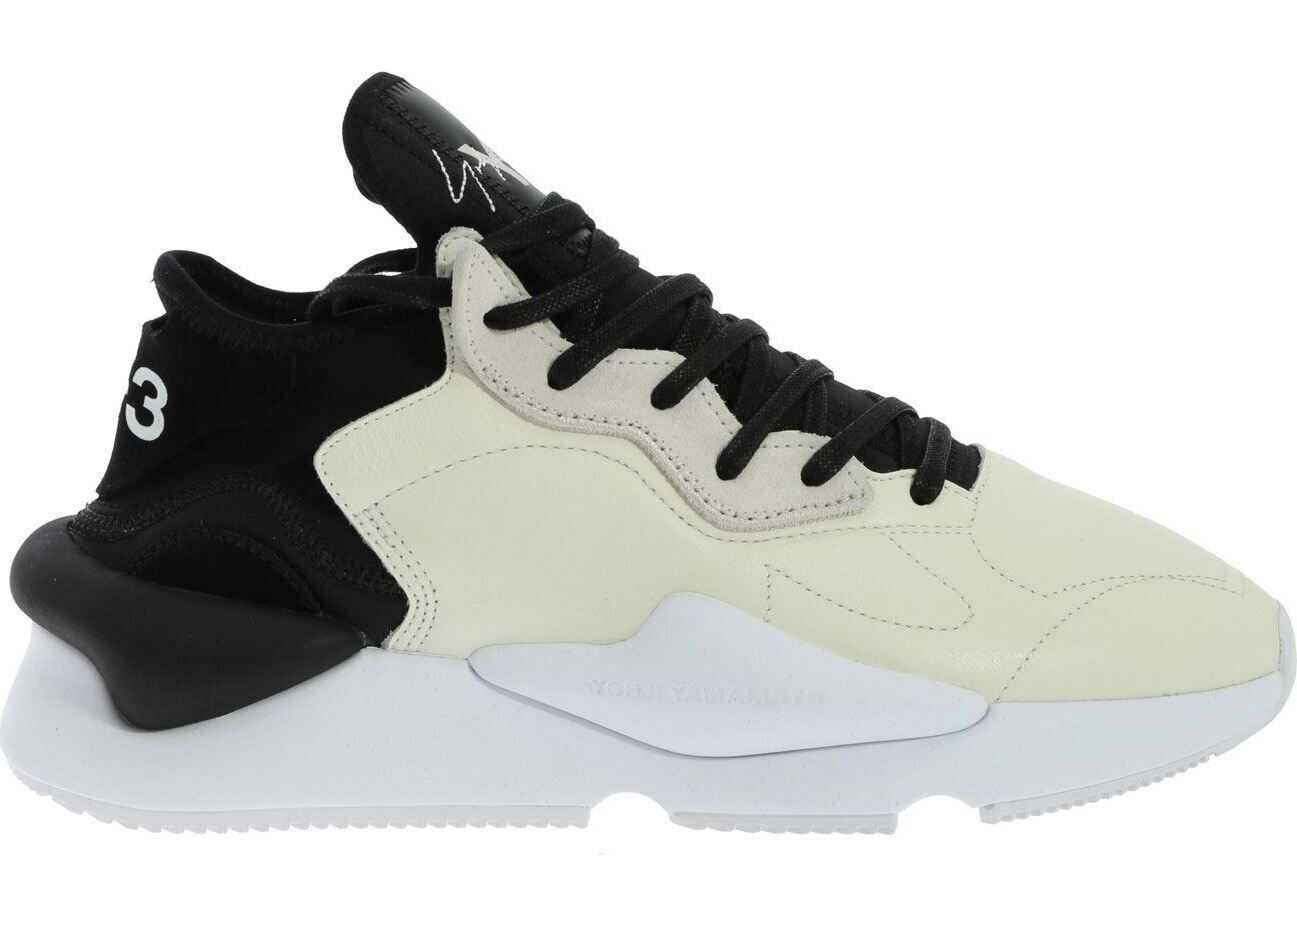 Y-3 Kaiwa Sneakers In Cream And Black* White